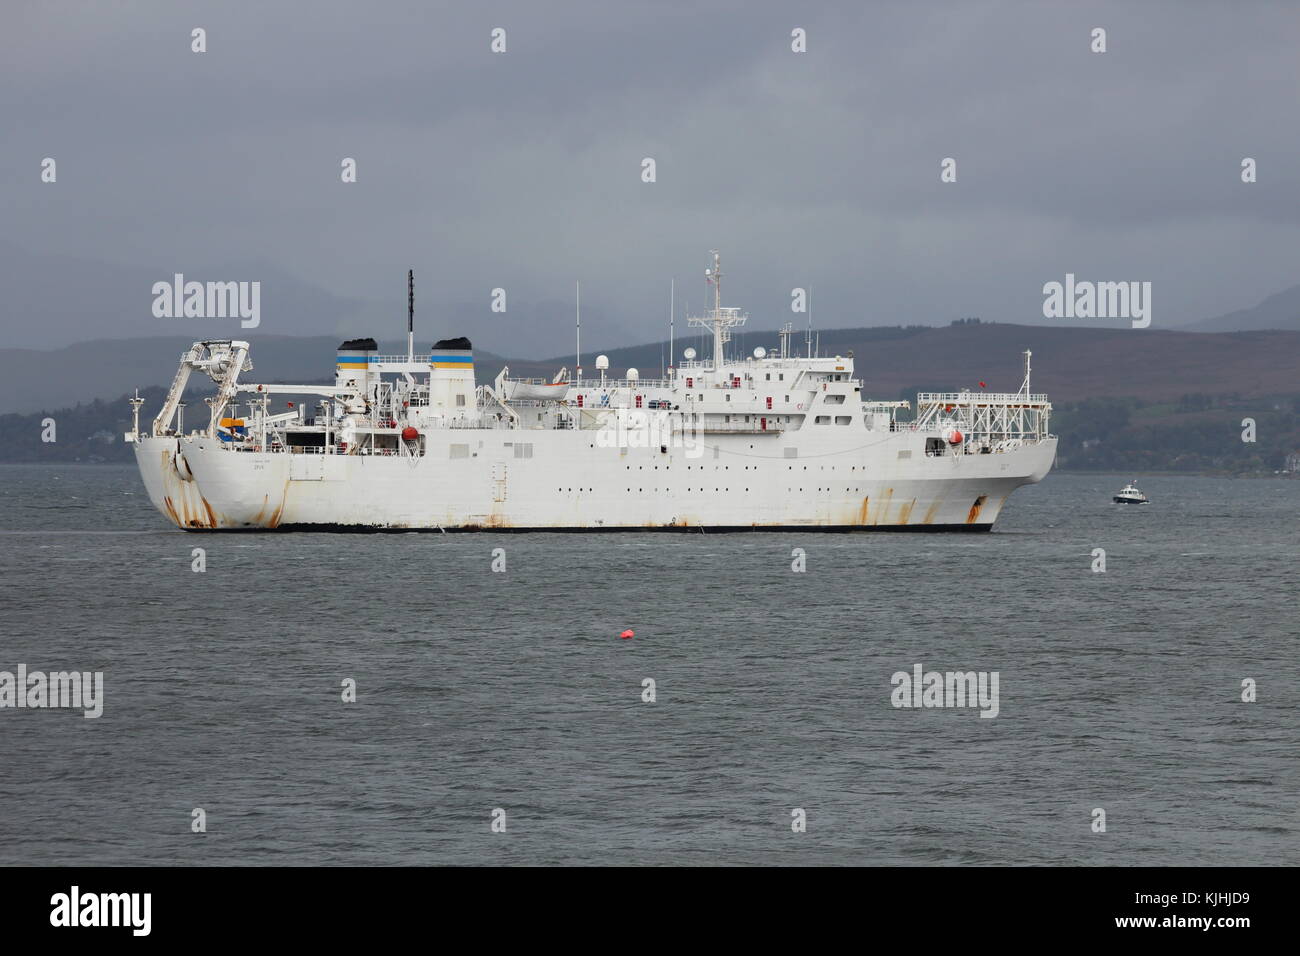 USNS Zeus (T-ARC-7), a Zeus-class cable laying and repair vessel operated by the US Navy, off Gourock on an inbound journey to the Faslane naval base. Stock Photo